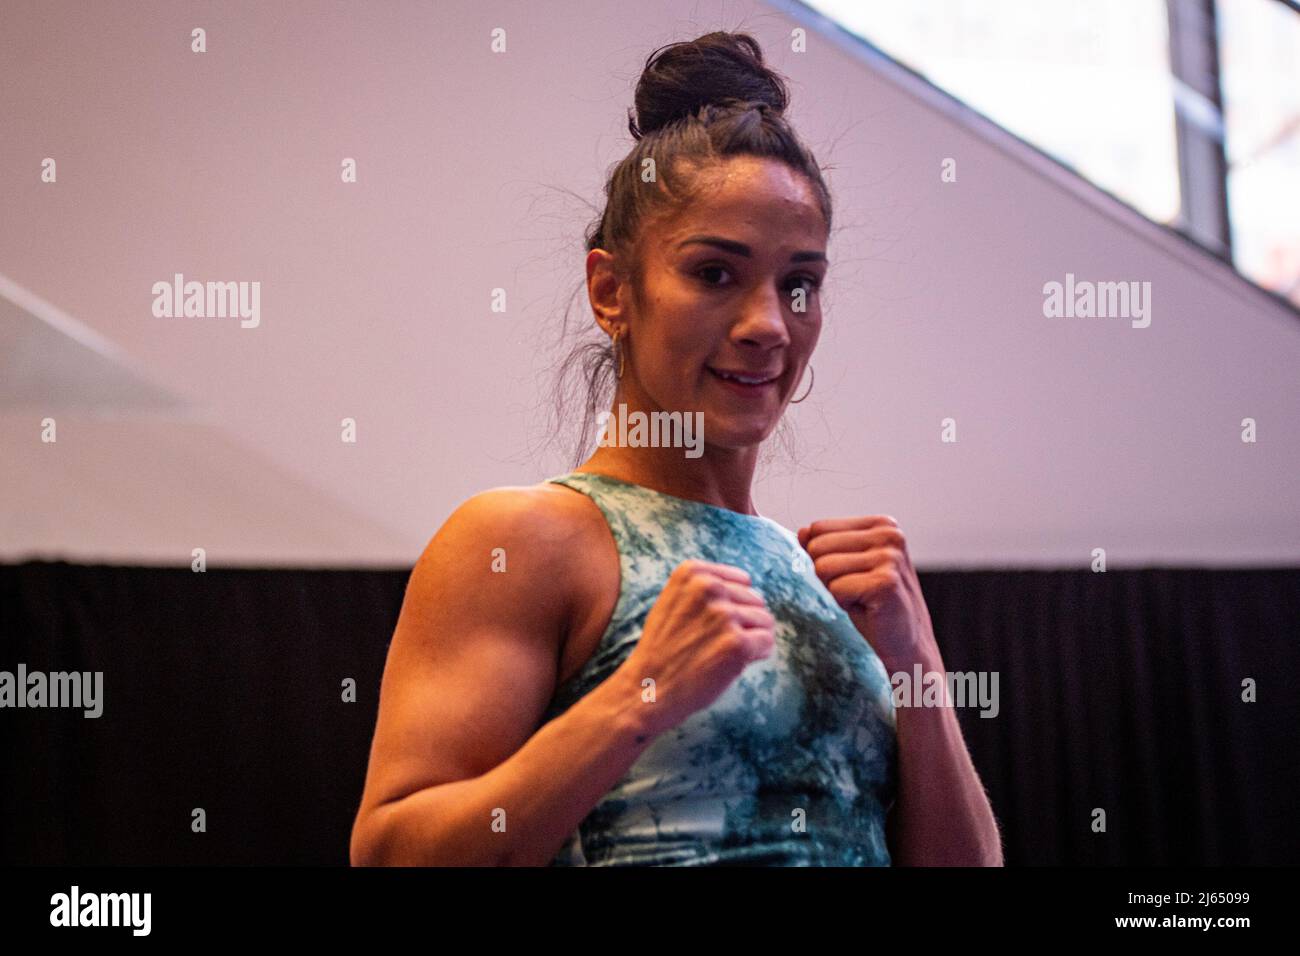 NEW YORK, NY - APRIL 27: Amanda Serrano during open workouts prior to her clash with Katie Taylor at Madison Square Garden on April 27, 2022 in New York, NY, United States. (Photo by Matt Davies/PxImages) Credit: Px Images/Alamy Live News Stock Photo